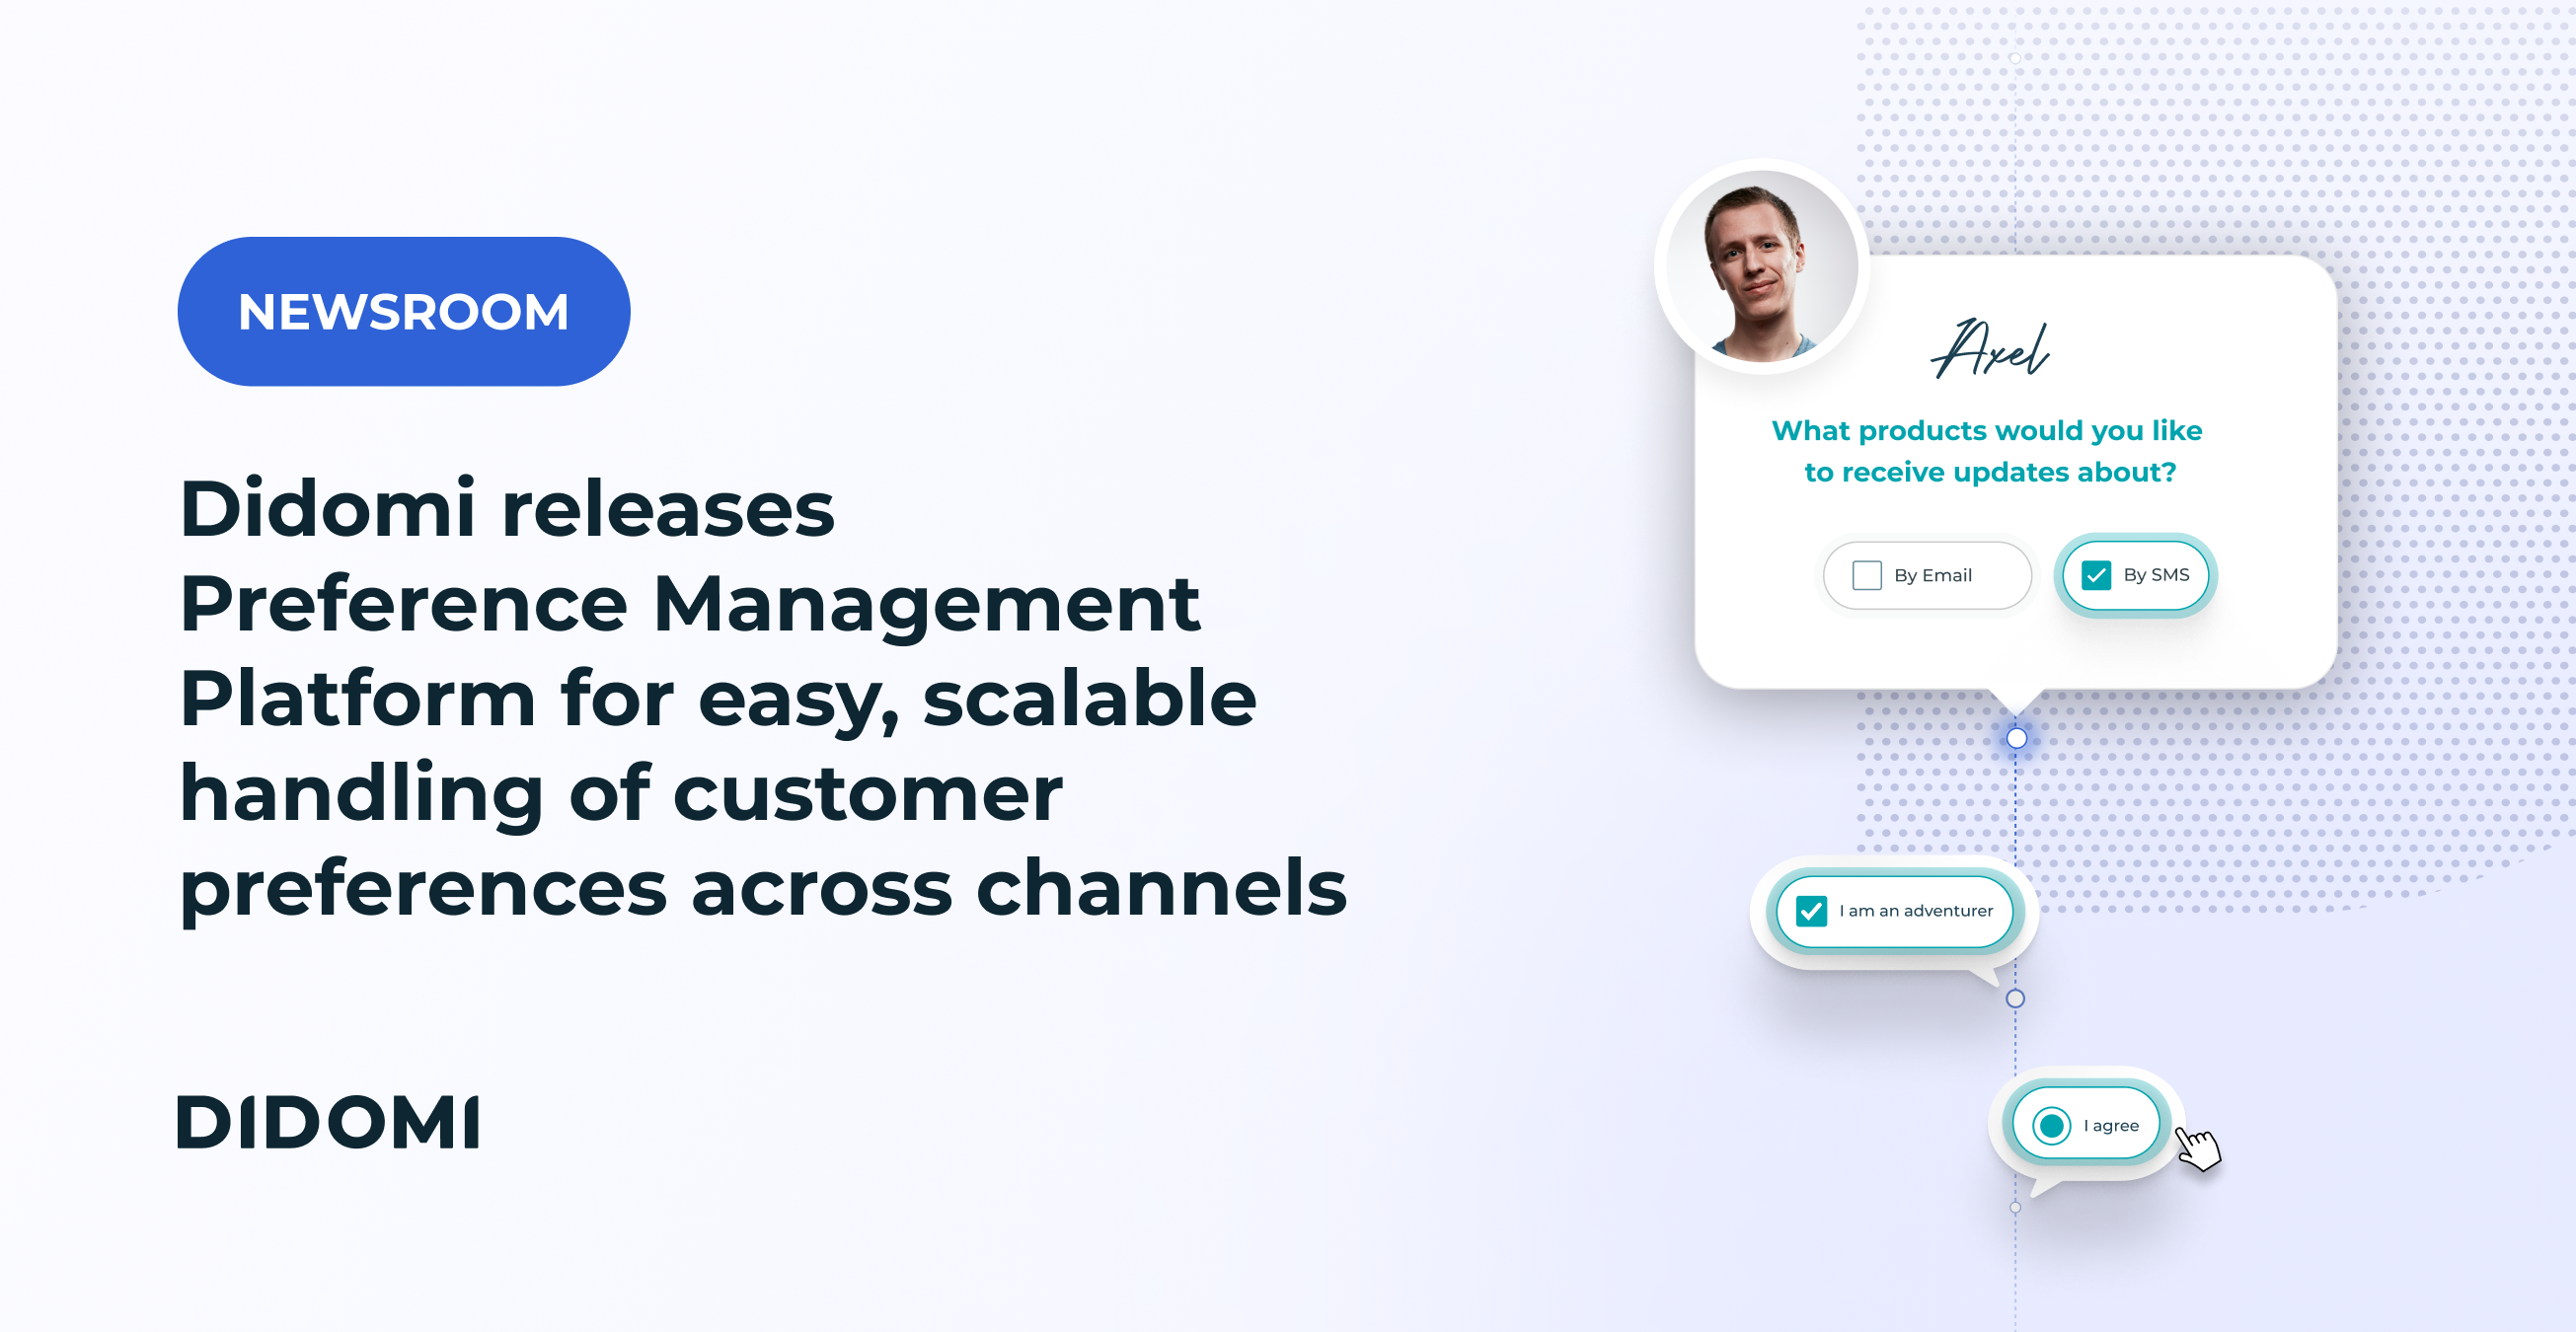 Didomi releases Preference Management Platform for easy, scalable handling of customer preferences across channels